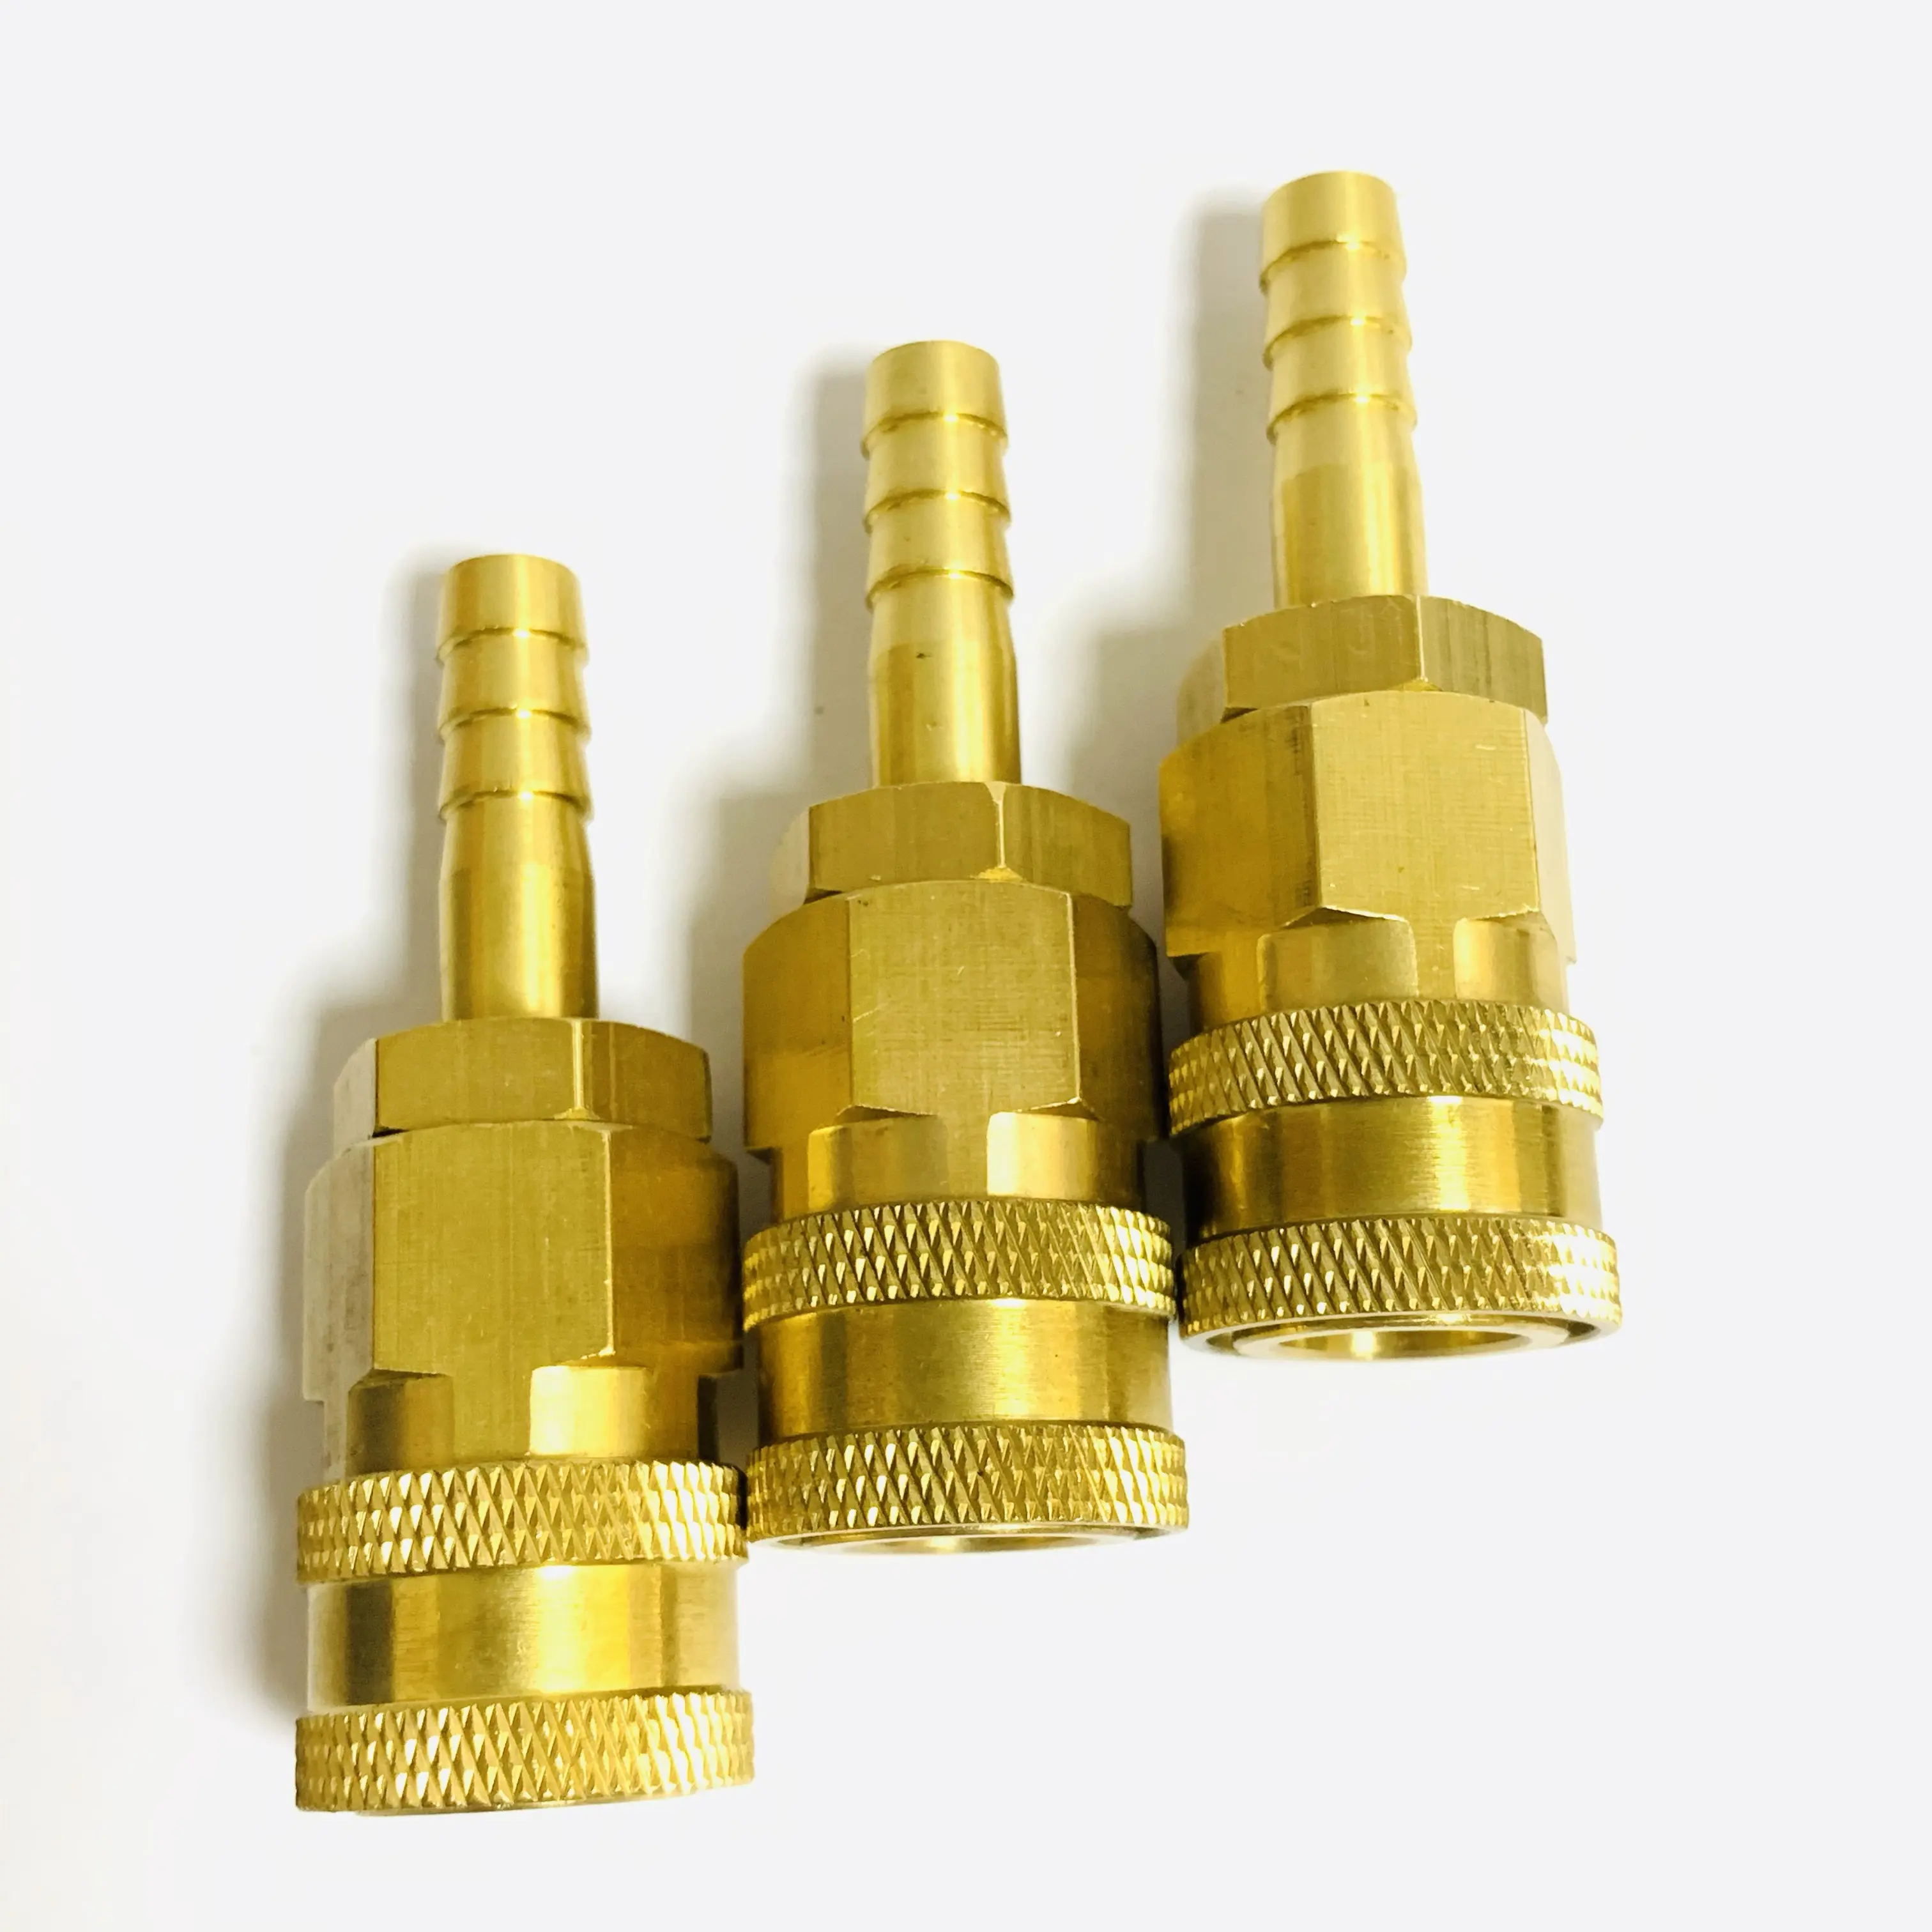 SH20 30 40 one touch pneumatic fitting european type brass air line quick coupling hose pipe fitting